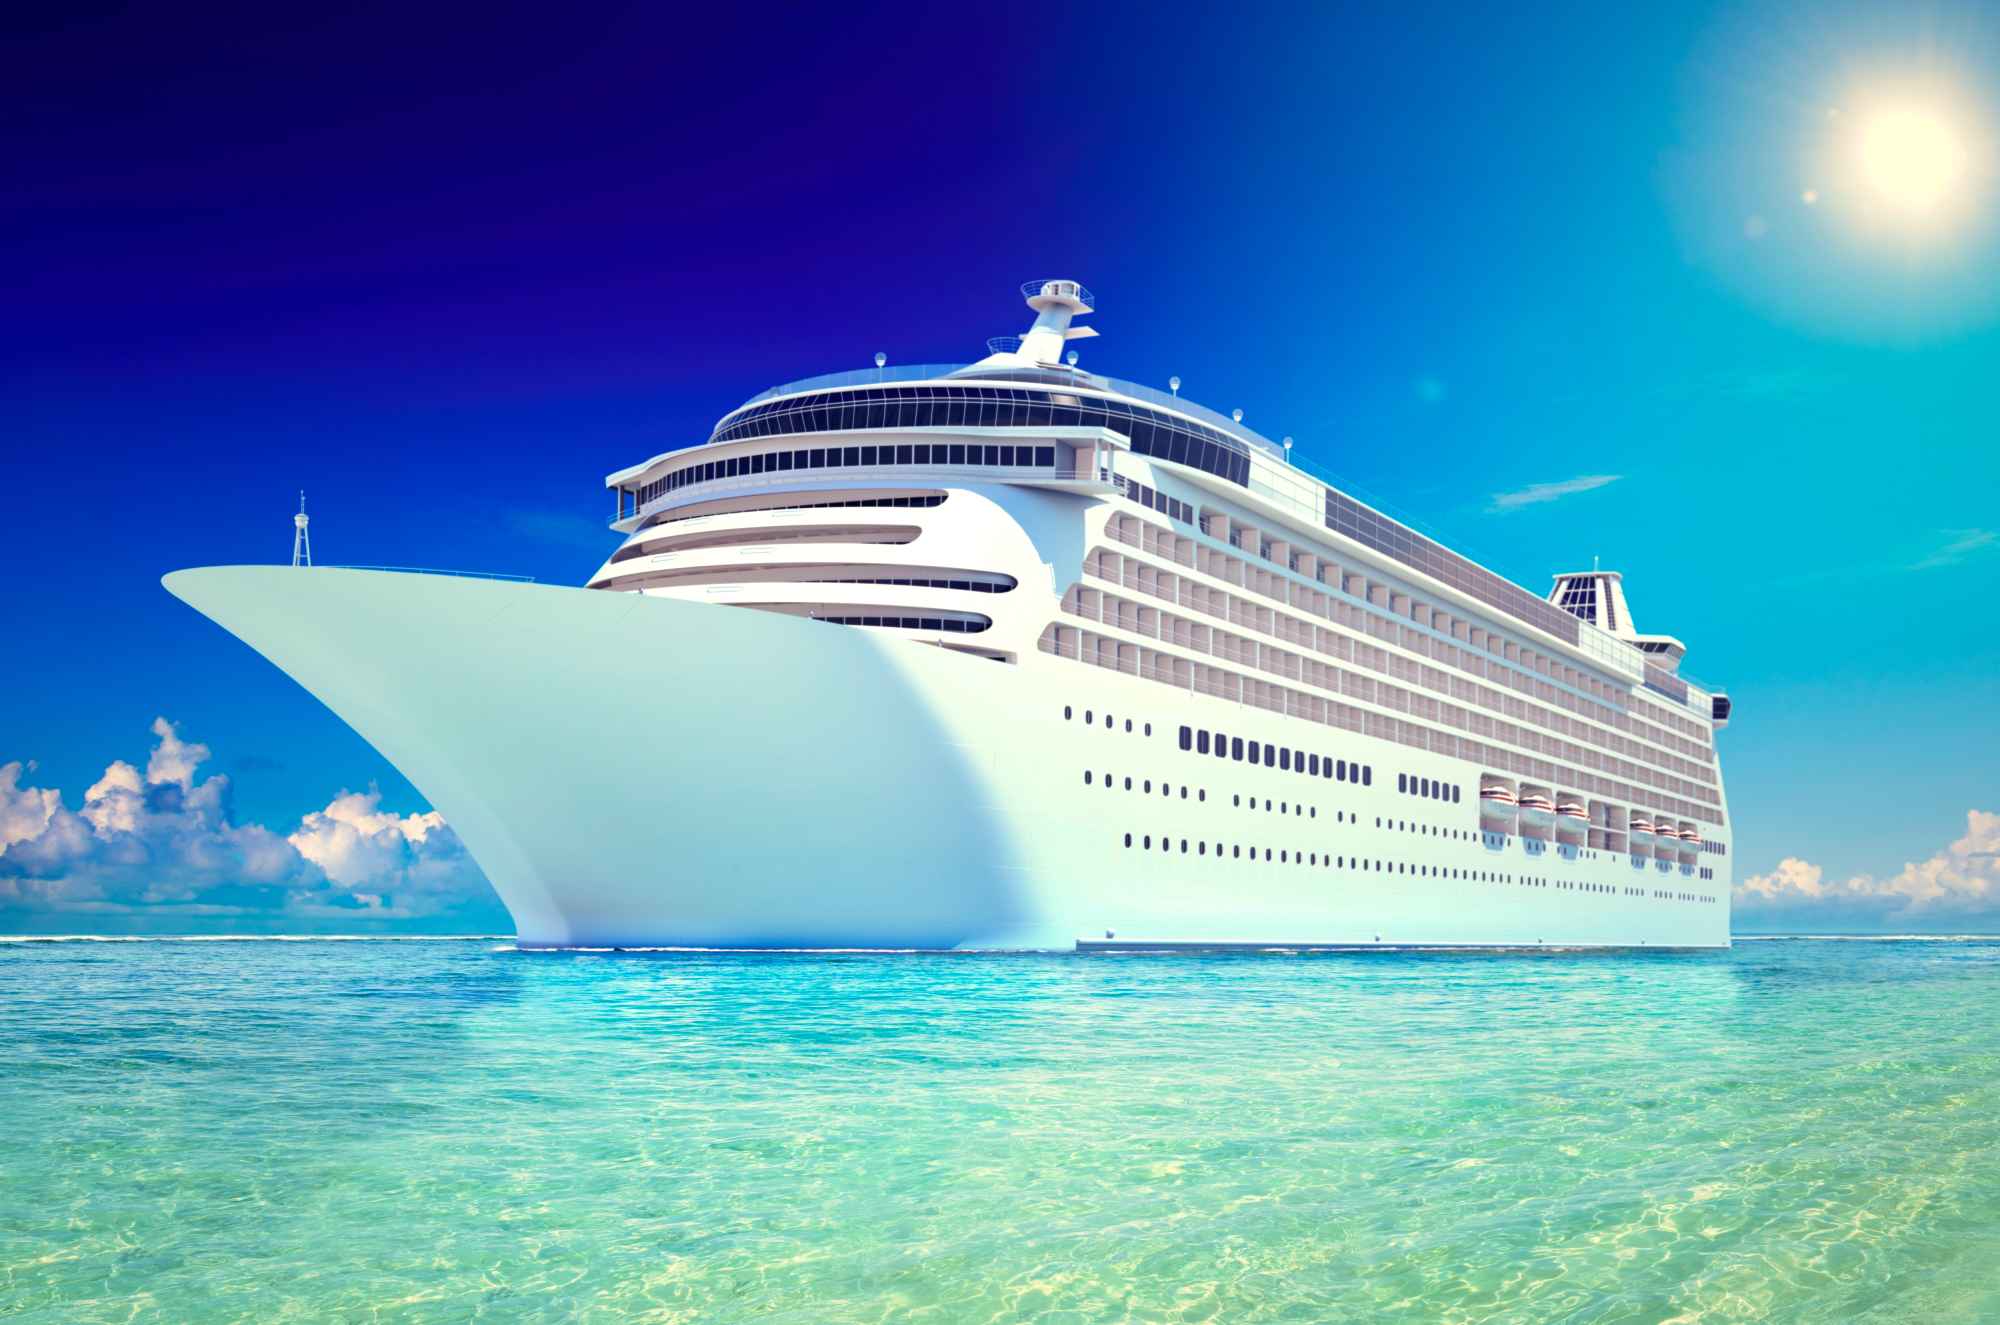 Top 10 Reasons to Spend your Next Vacation on a Cruise